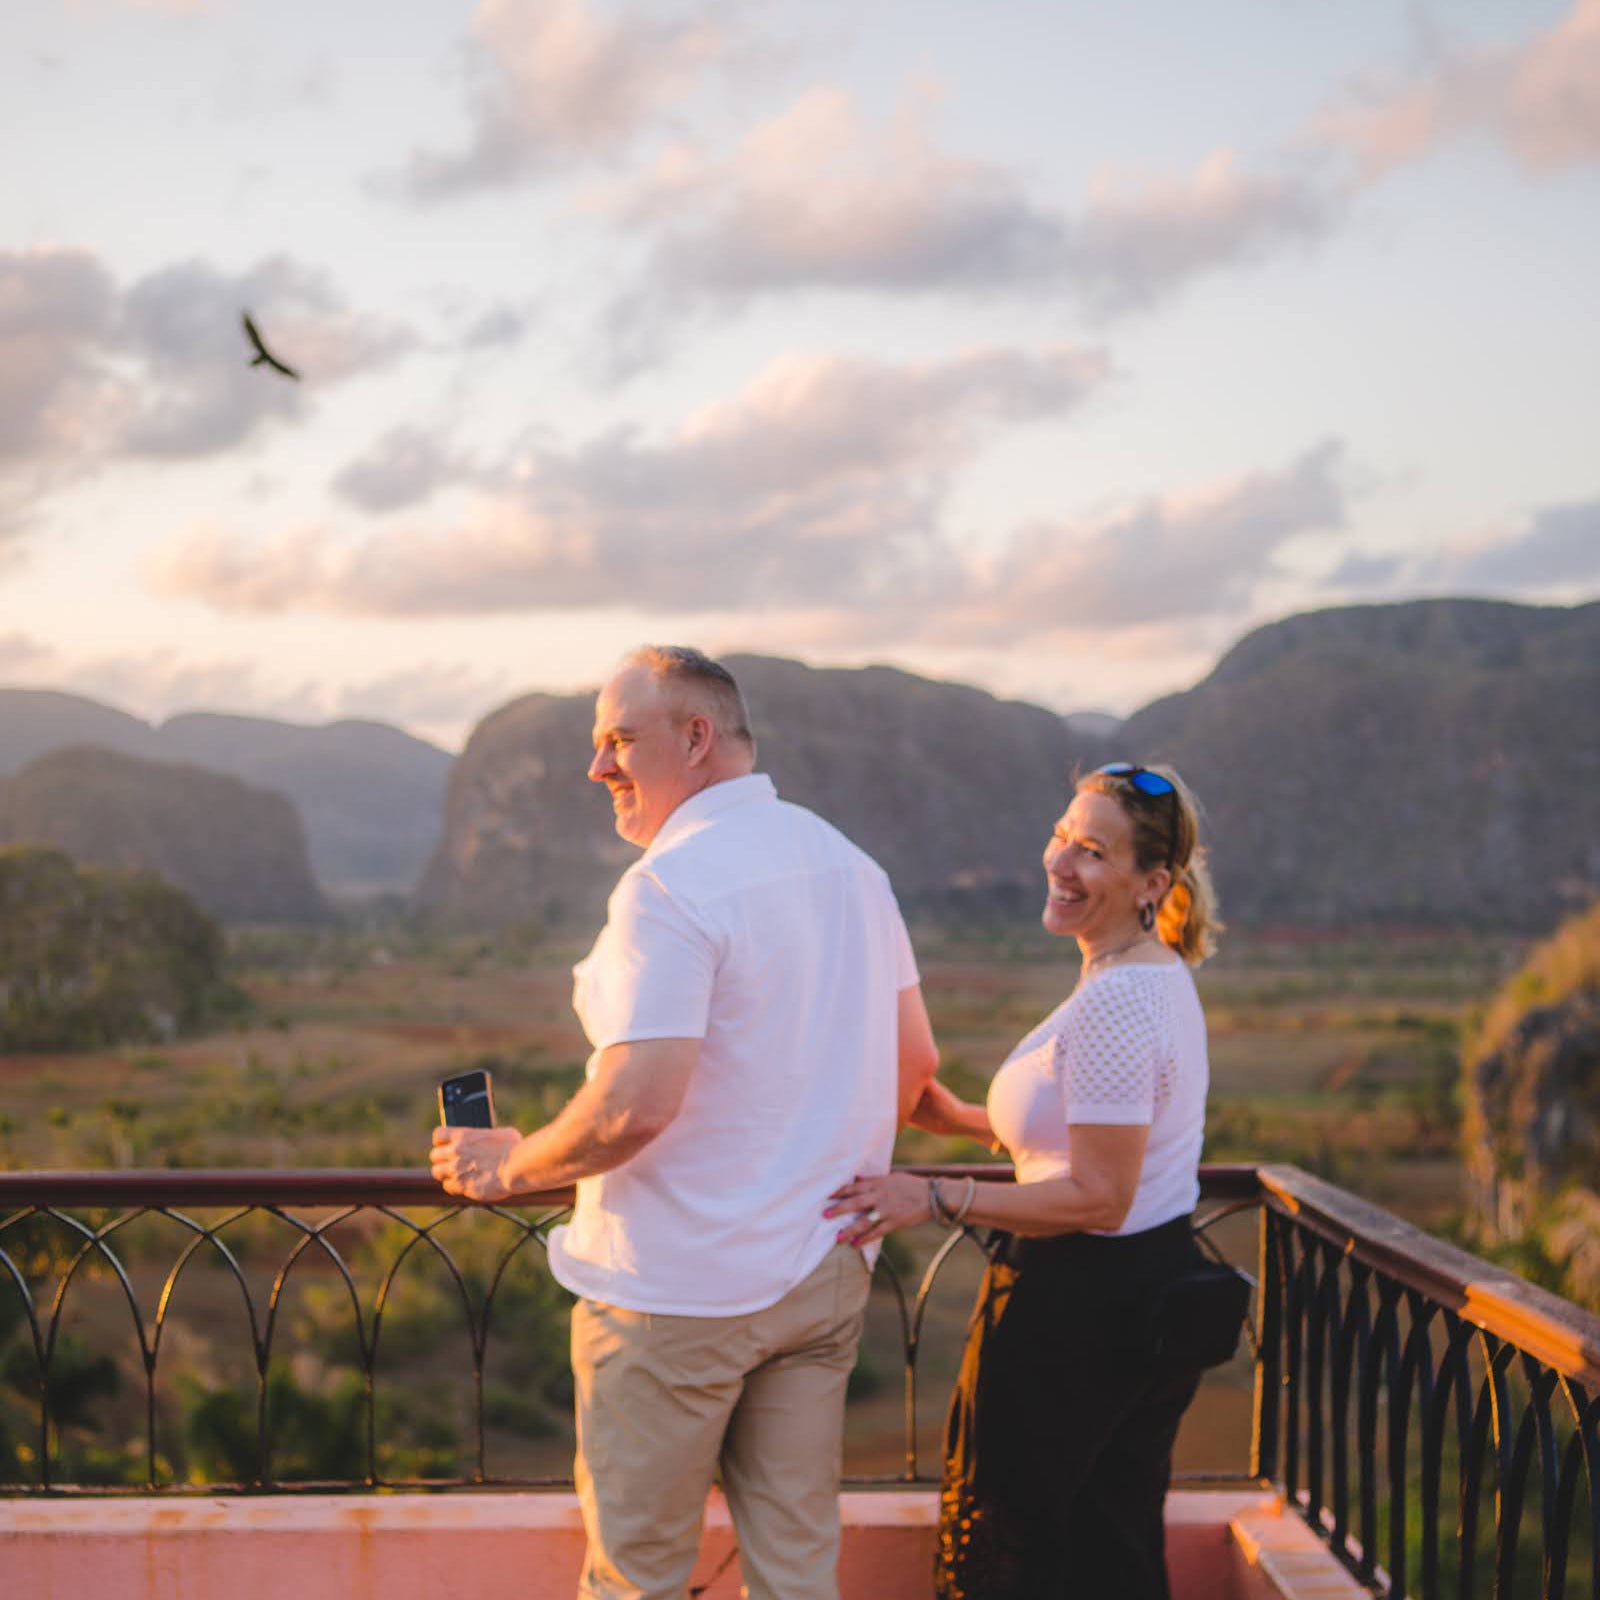 A sweet couple on their Luxury Cuba Tour wearing matching white outfits and laughing while enjoying the sunset at the Los Jazmines Viewpoint overlooking the Vinales Valley in Vinales Cuba